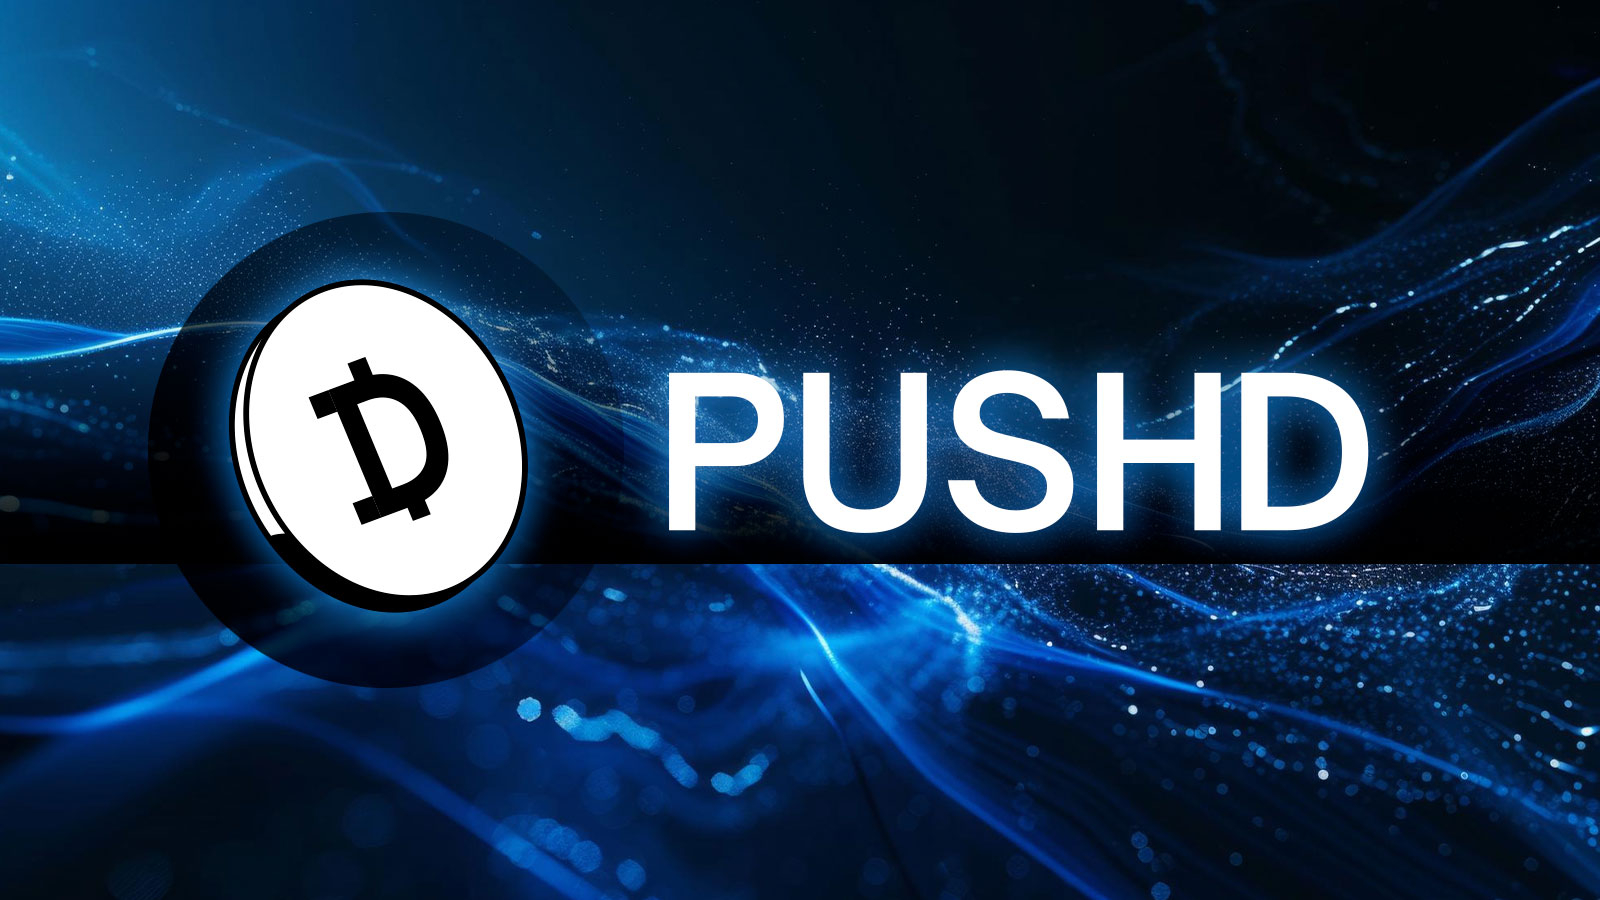 Pushd (PUSHD) Asset Pre-Sale Analyzed by Traders and Liquidity Providers in April as Thorchain (RUNE), Maker (MKR) Remain Top Large Cap Altcoins